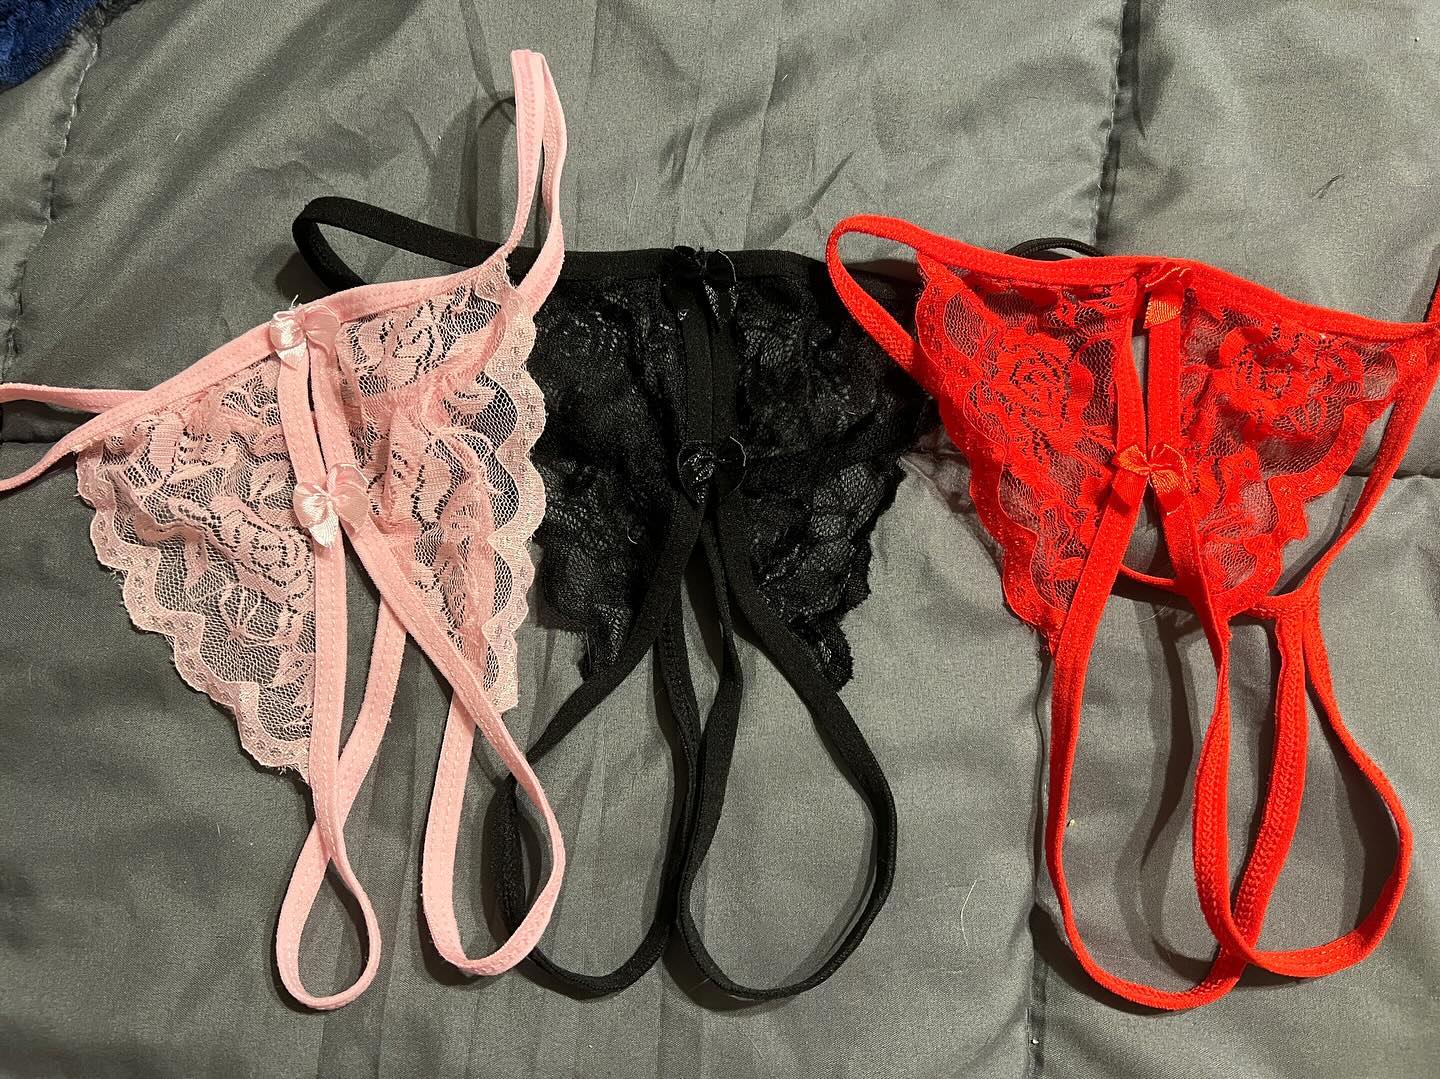 My new fun adventure😊. Selling some sexy panties for anyone interested. Thongs. Crotchless (for the ass lovers). Lacy and regular. Will wear them upon request for 1-2 days. Pictures for proof. Vacuum sealed and shipped. C@shapp $25. Buy 3 get 1 free. Let me know. Share with your friends😘